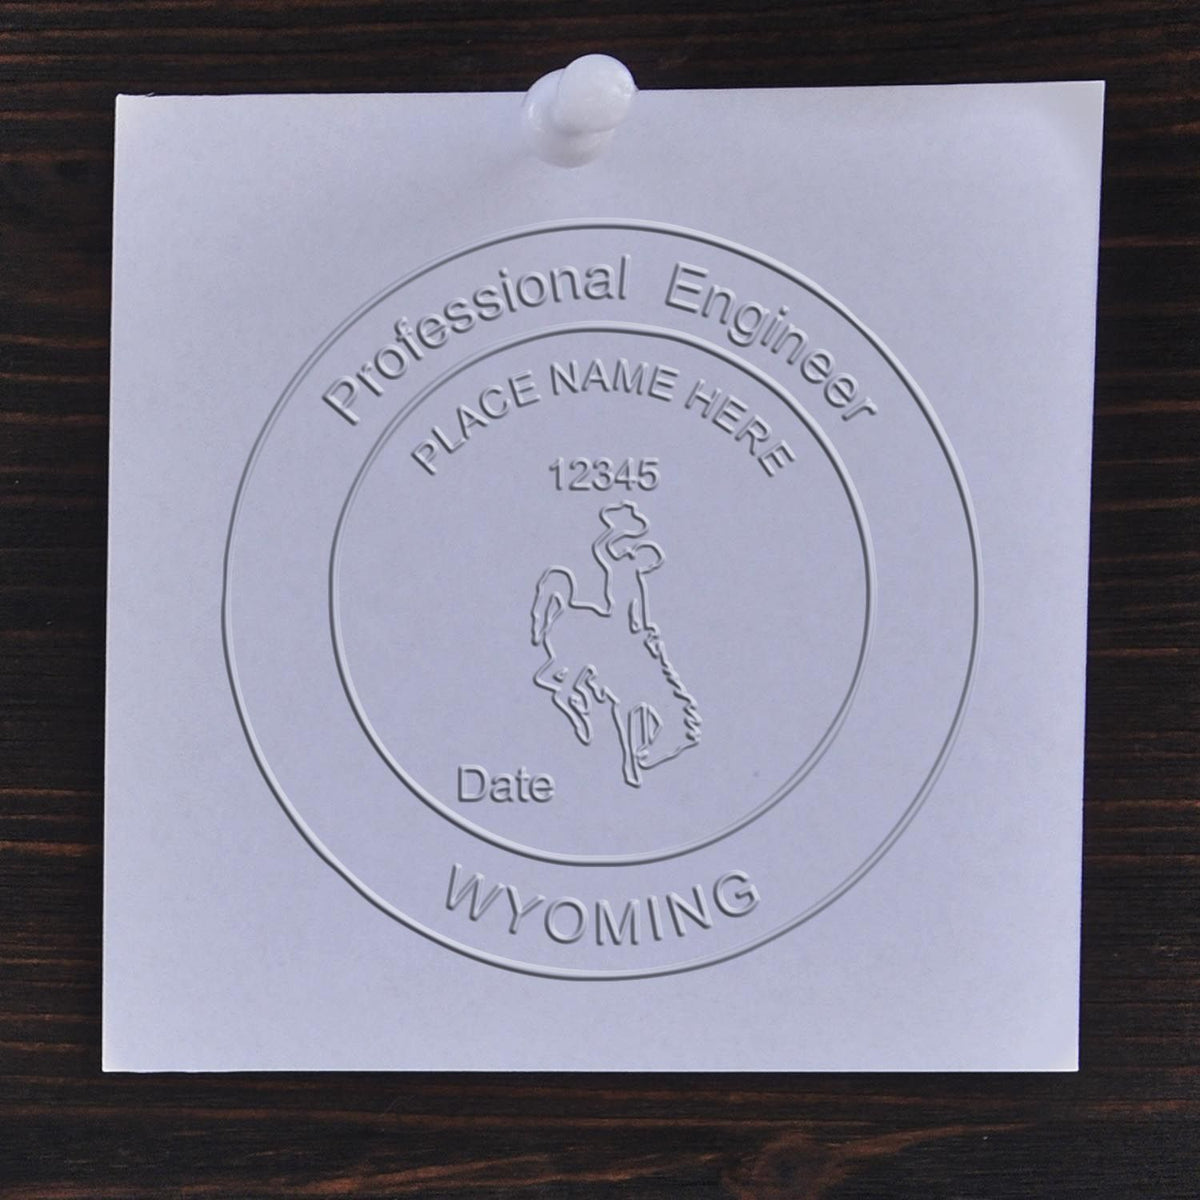 A photograph of the Hybrid Wyoming Engineer Seal stamp impression reveals a vivid, professional image of the on paper.